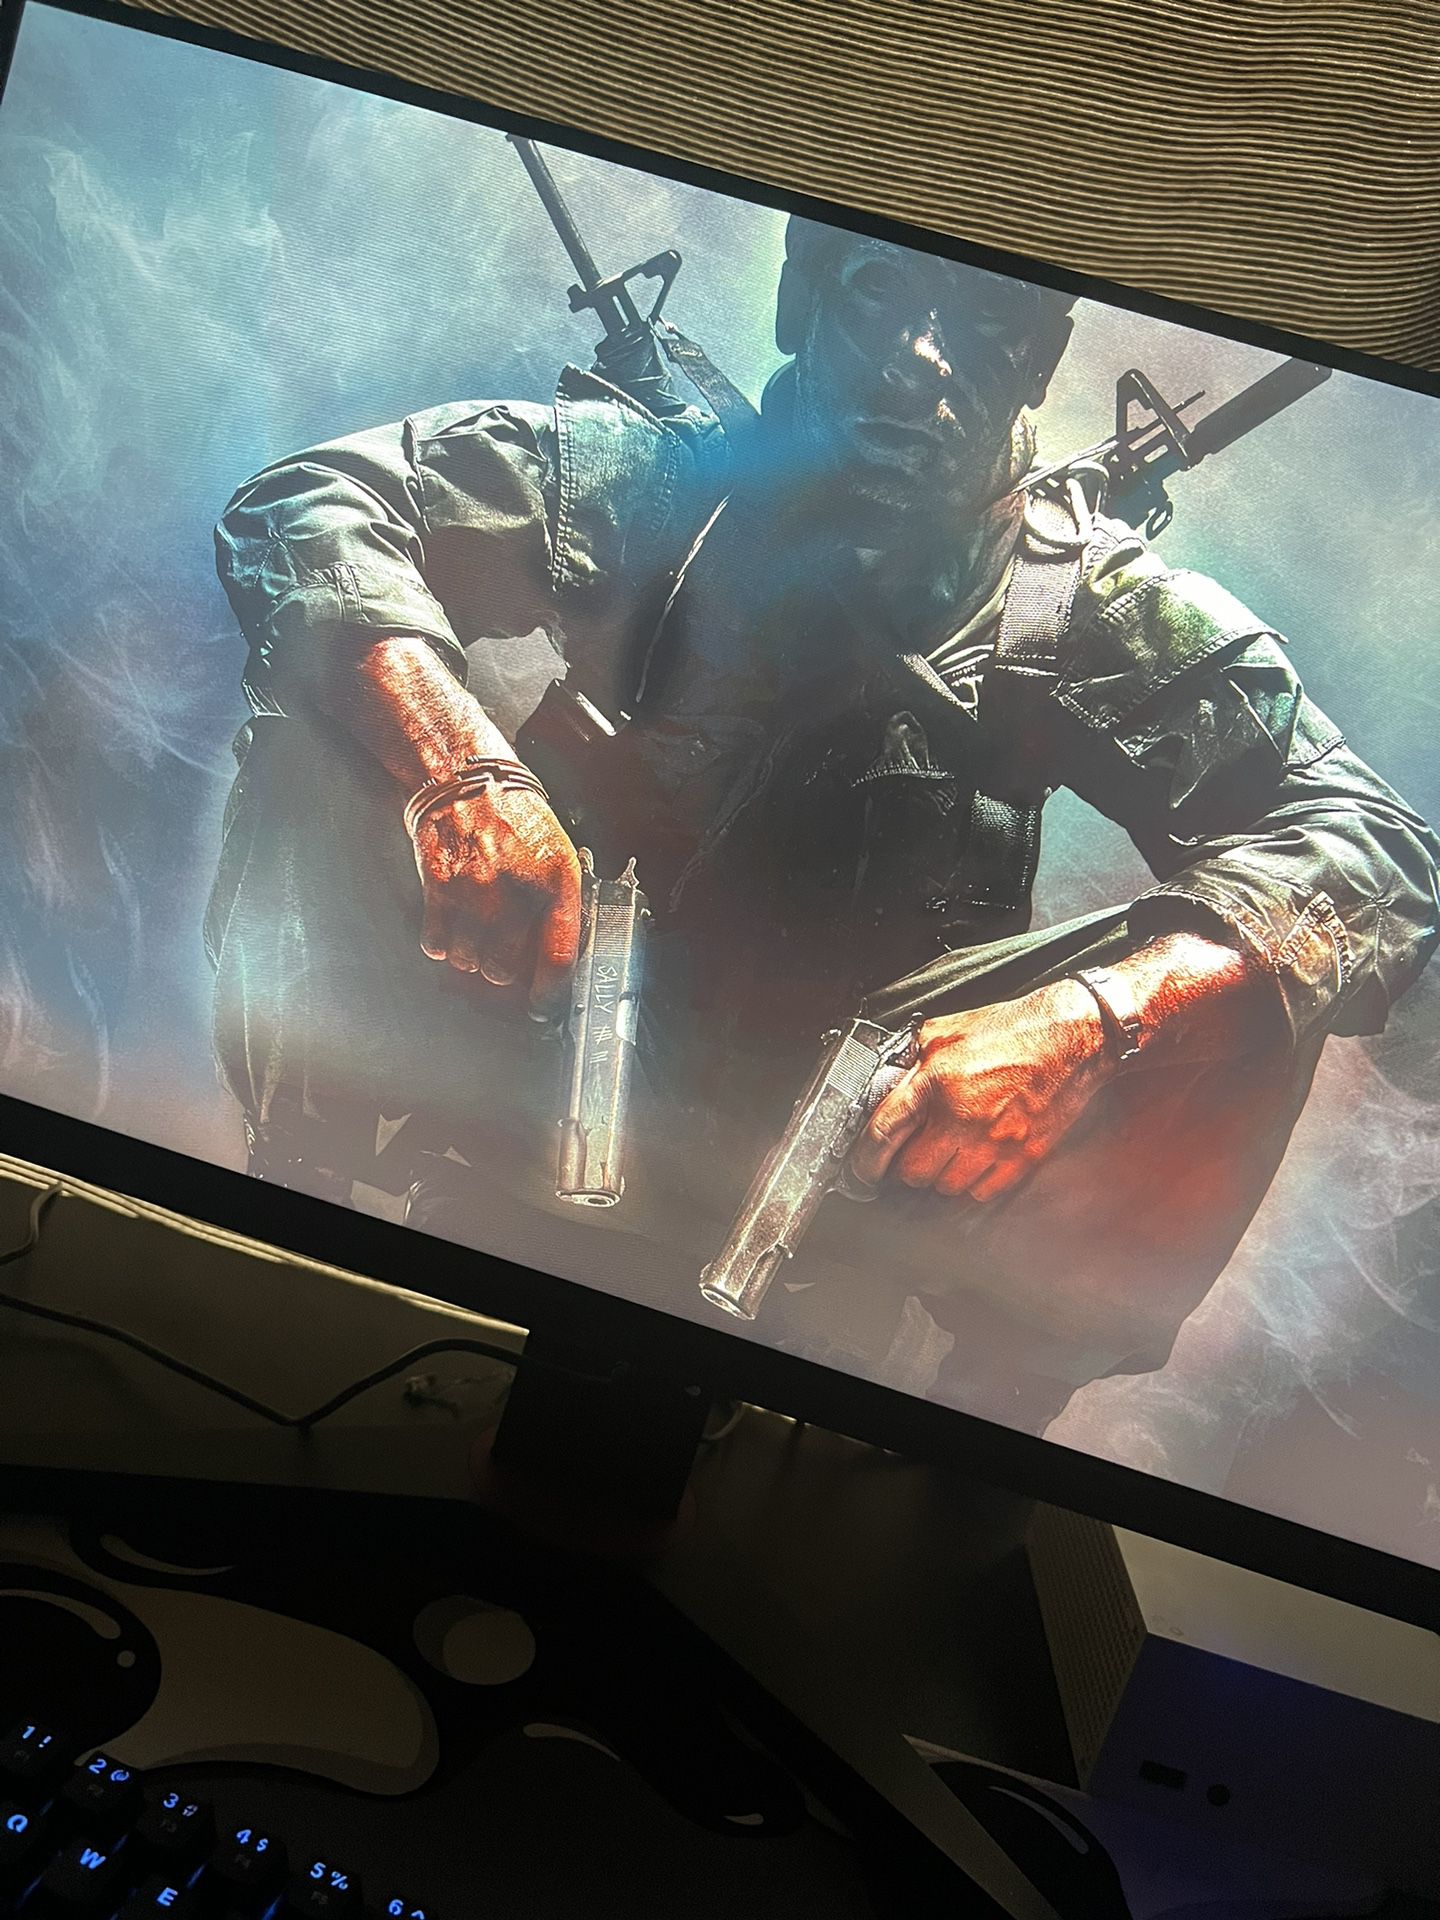 gaming monitor 165hz 1ms 27in $80-100